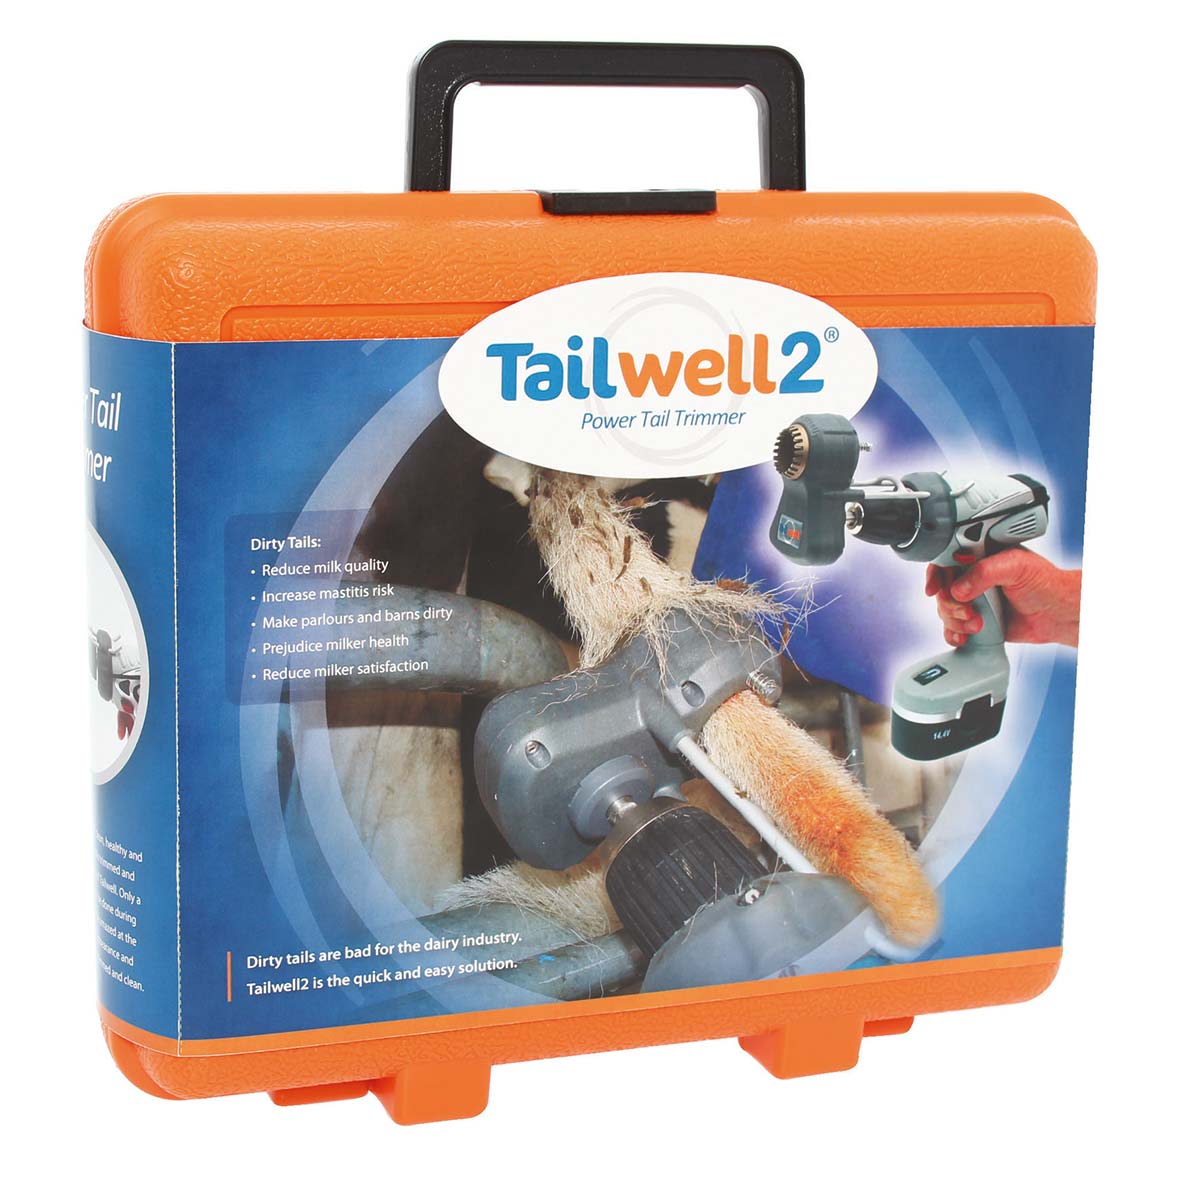 Sharpening paste for Tailwell2 TailTrimmer